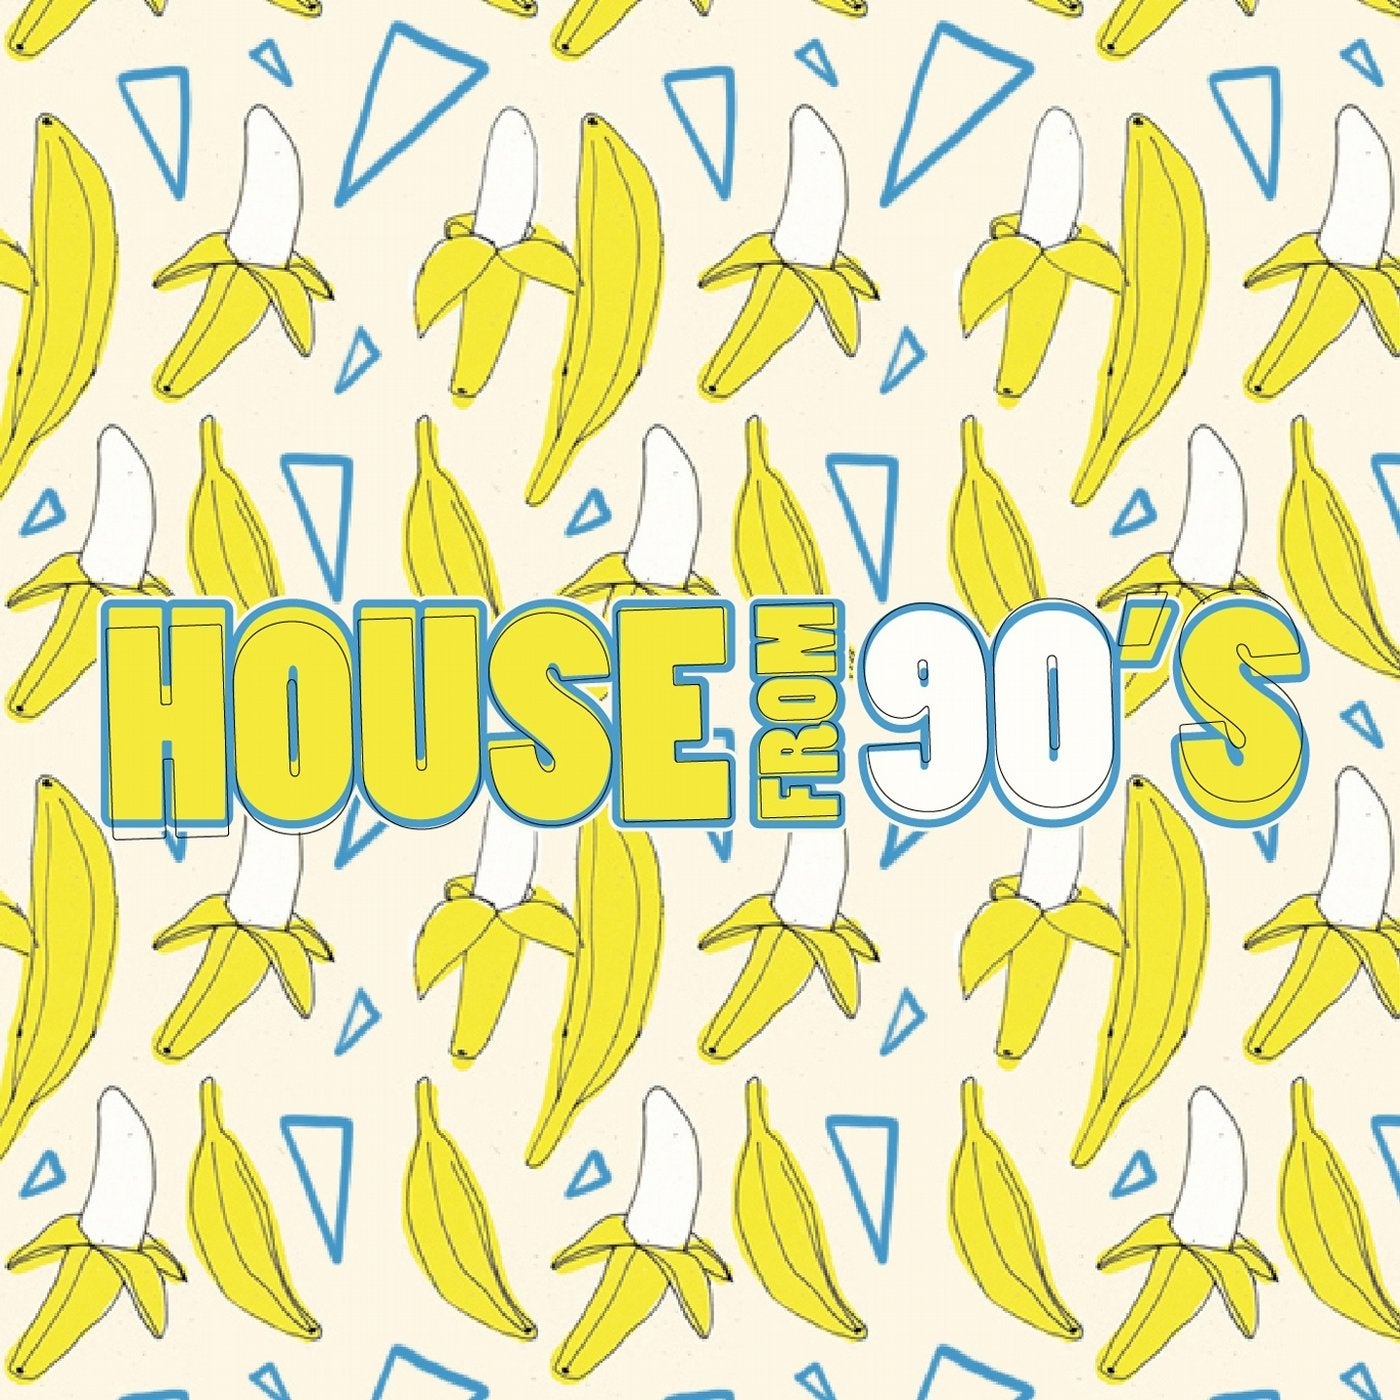 House from 90's